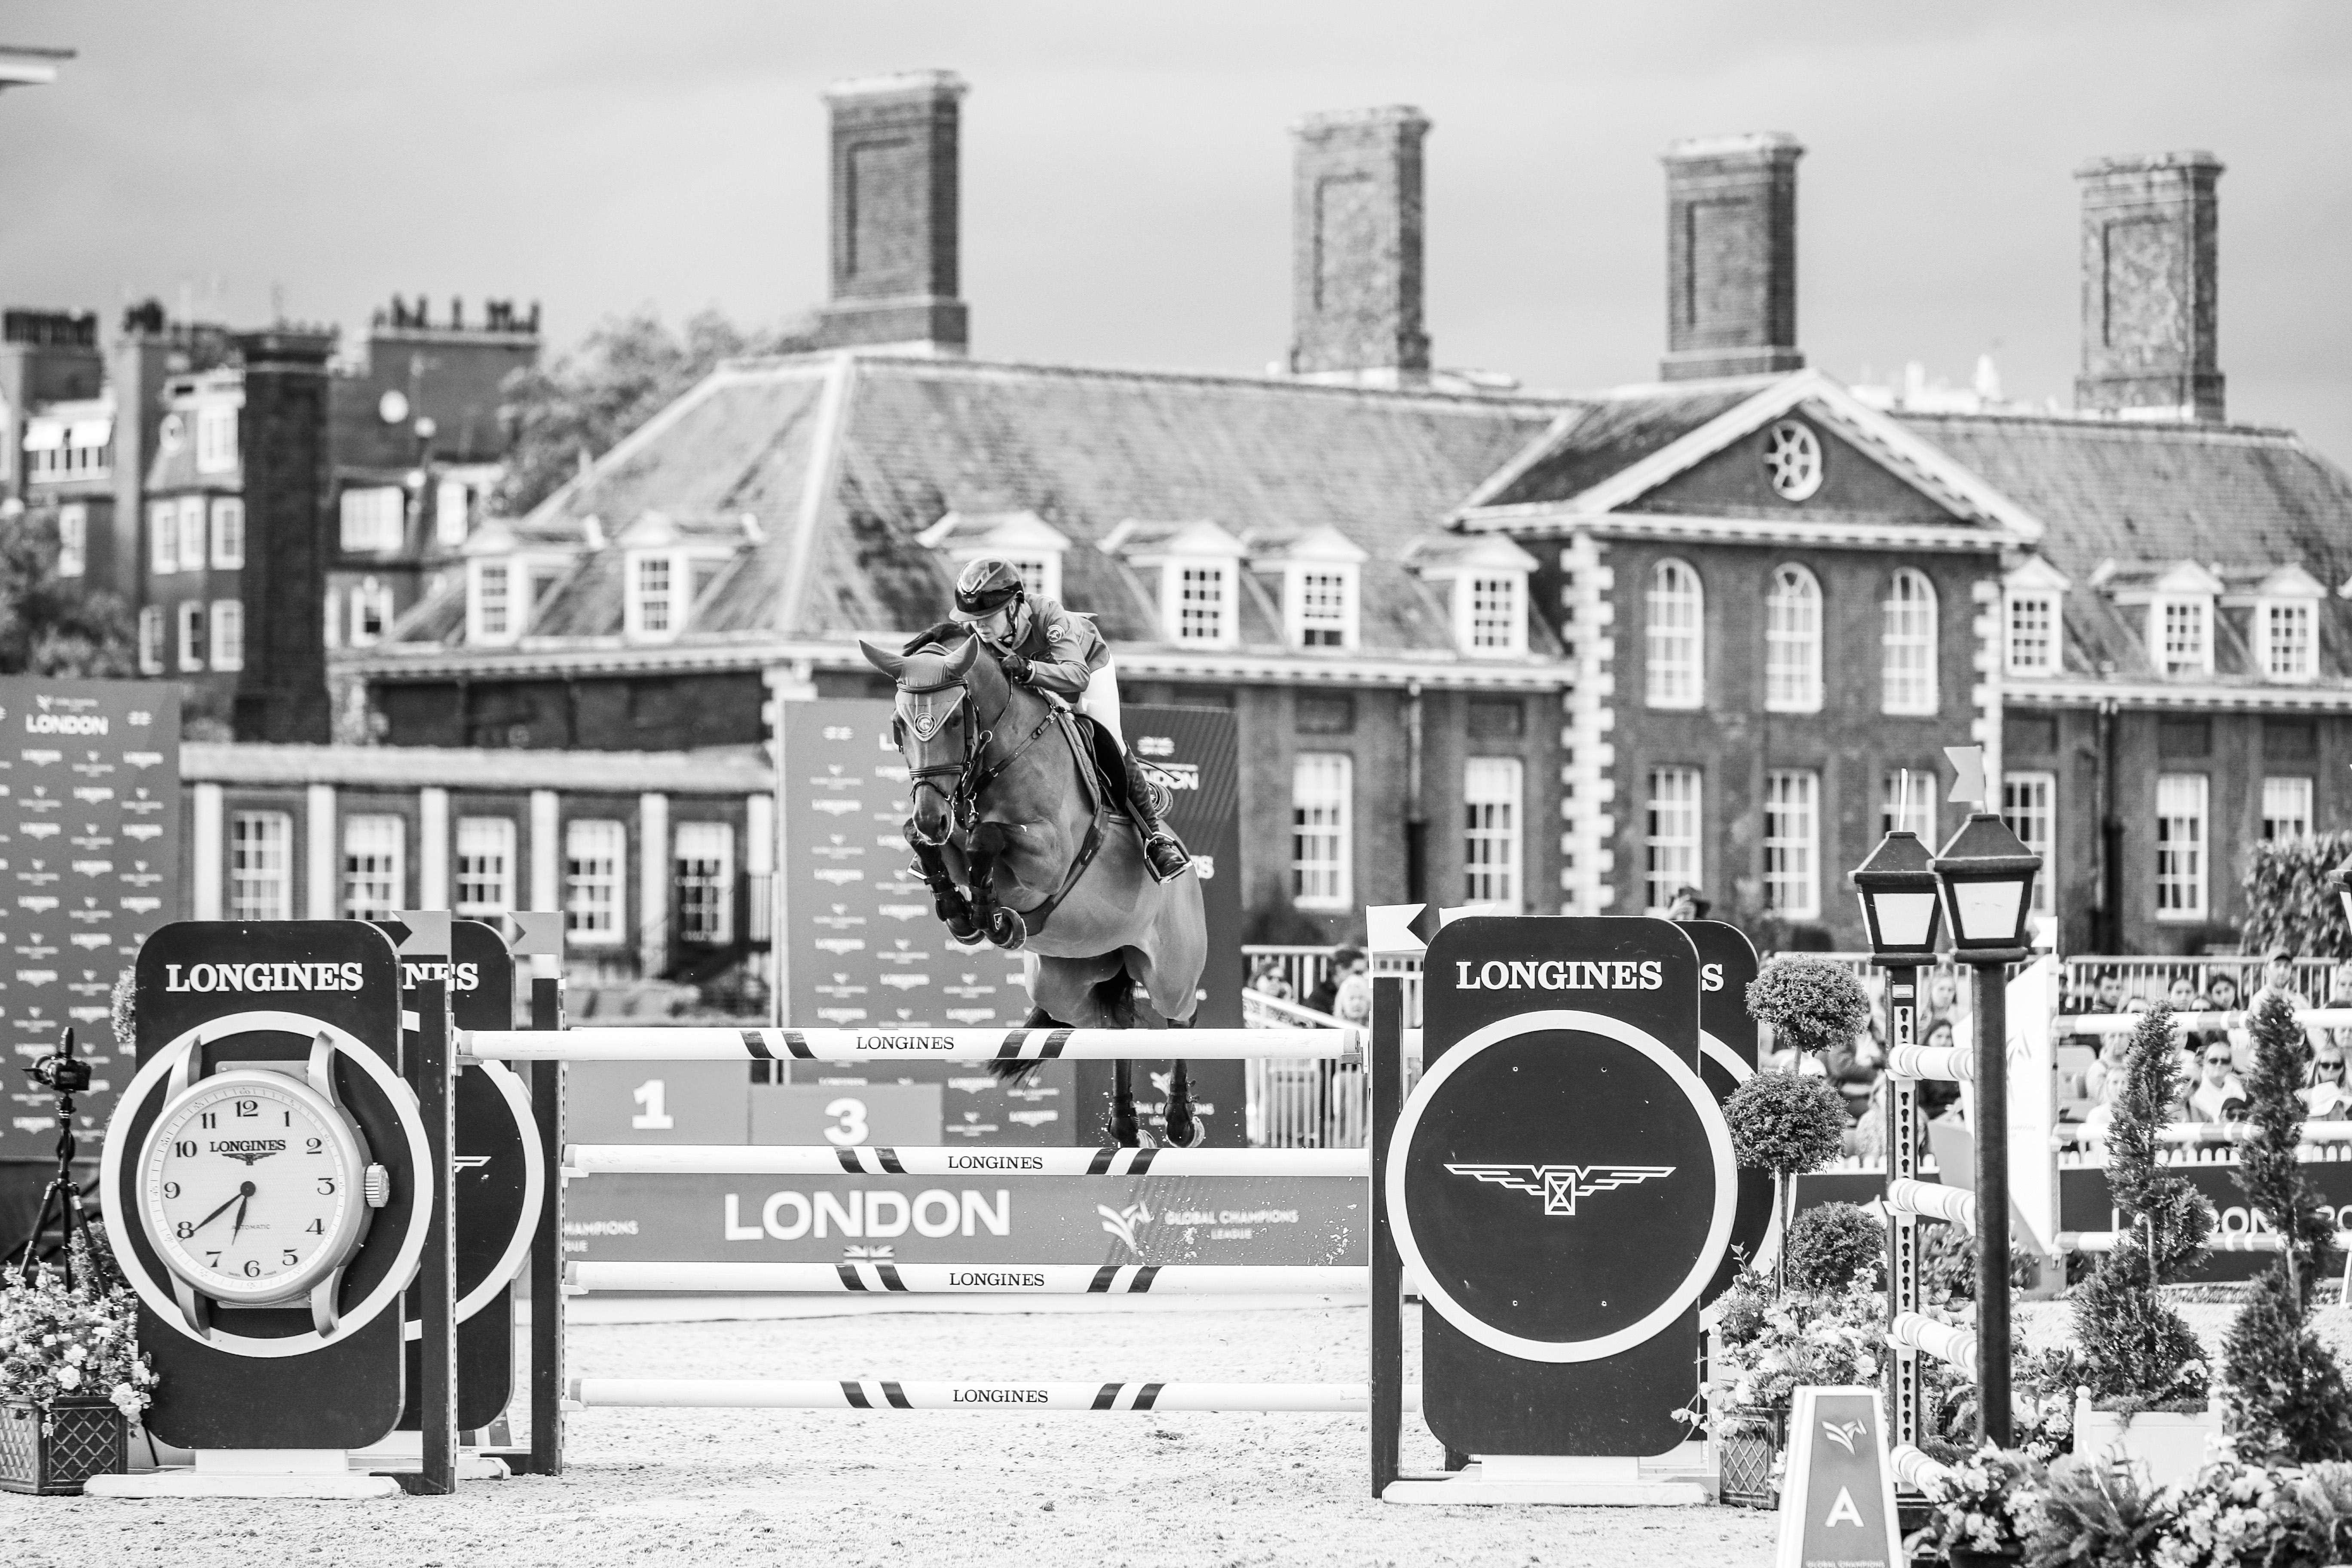 Good times at Longines Global Champions Tour of London